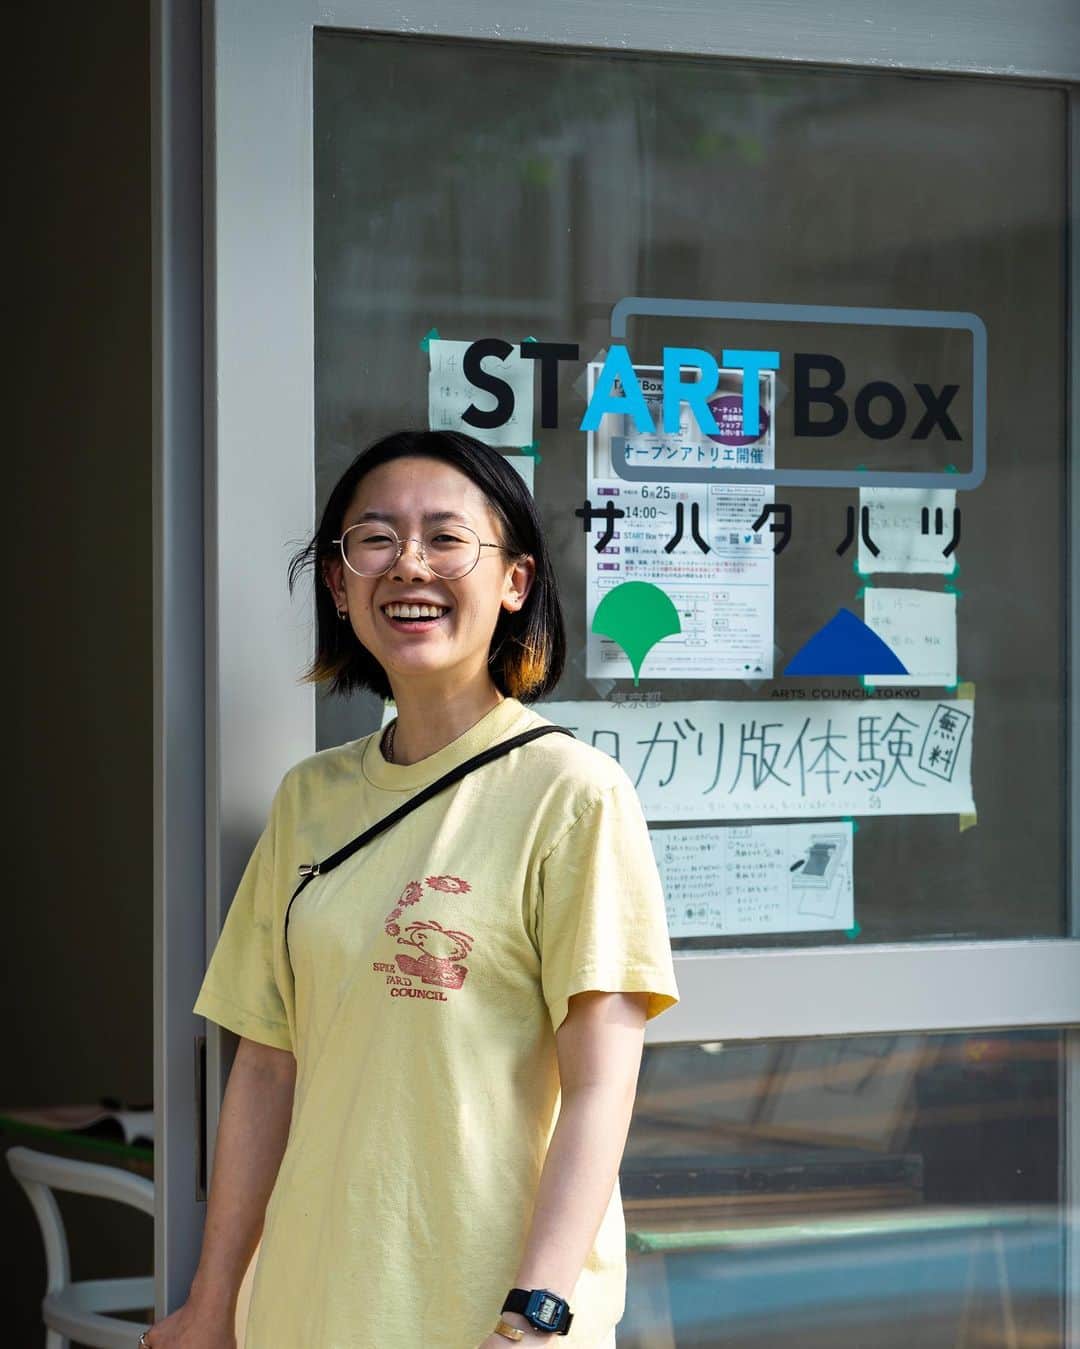 Promoting Tokyo Culture都庁文化振興部さんのインスタグラム写真 - (Promoting Tokyo Culture都庁文化振興部Instagram)「START Box Sasahatahatsu, a creative space utilising a vacant storefront in a metropolitan housing complex in the Sasazuka - Hatagaya area, opened in April. The project provides artists seeking a place to create with an easy-to-use space where new encounters can be made.  The first phase of the open atelier, which took place on June 25th, was attended by five talented artists showcasing their unique approaches. Their artworks provided a glimpse into the vibrant art scene in Tokyo.   Stay tuned for upcoming activities and unseen works by these talented individuals.  Artists in order of appearance: Kaho Hayakawa @kaho.hayakawa Yutaro Yamada @yutaro__yamada Haruka Yamada @haarukka.yamada Mai Yamamoto @glass_mai_ Yuki Oeda @oooooooedaaaaaa  -  渋谷区にある笹塚〜幡ヶ谷エリアの都営住宅の空き店舗を活用した創作活動スペース「START Box ササハタハツ」が、今年4月にオープンしました。 このプロジェクトでは、創作場所を求めるアーティストを対象に、利用しやすく新たな出会いや交流も生まれるような場を提供されています。  6月25日に行われた第一期のオープンアトリエには、様々なアプローチで創作をする5名のアーティストが参加。 作品や創作風景を通して、東京のアートの今を間近に感じられる機会となっていました。  アーティストの皆さんの今後の活躍とまだ見ぬ作品の数々に、ぜひご期待ください。  【活動アーティスト】※写真掲載順 ※敬称略 早川 佳歩　　　@kaho.hayakawa 山田 悠太郎　　@yutaro__yamada 山田 悠　　　　@haarukka.yamada 山本 麻以　　　@glass_mai_ おおえだ ゆき　@oooooooedaaaaaaa  #tokyoartsandculture  #artspace#artistinresidence  #shibuya #STARTBoxササハタハツ #ササハタハツ #渋谷 #artoftheday #fineart #artstagram #artlover #fineartphotography #art_of_japan_ #artjournal #artworld #arthistory #finearts #artworkoftheday #artandculture #artsandculture #artculture #loveofart #artexperience #culturalexperience #artlovefeed #cultureofcreatives #creativeart #exhibitionview #artexhibition #exhibitions」7月7日 22時28分 - tokyoartsandculture